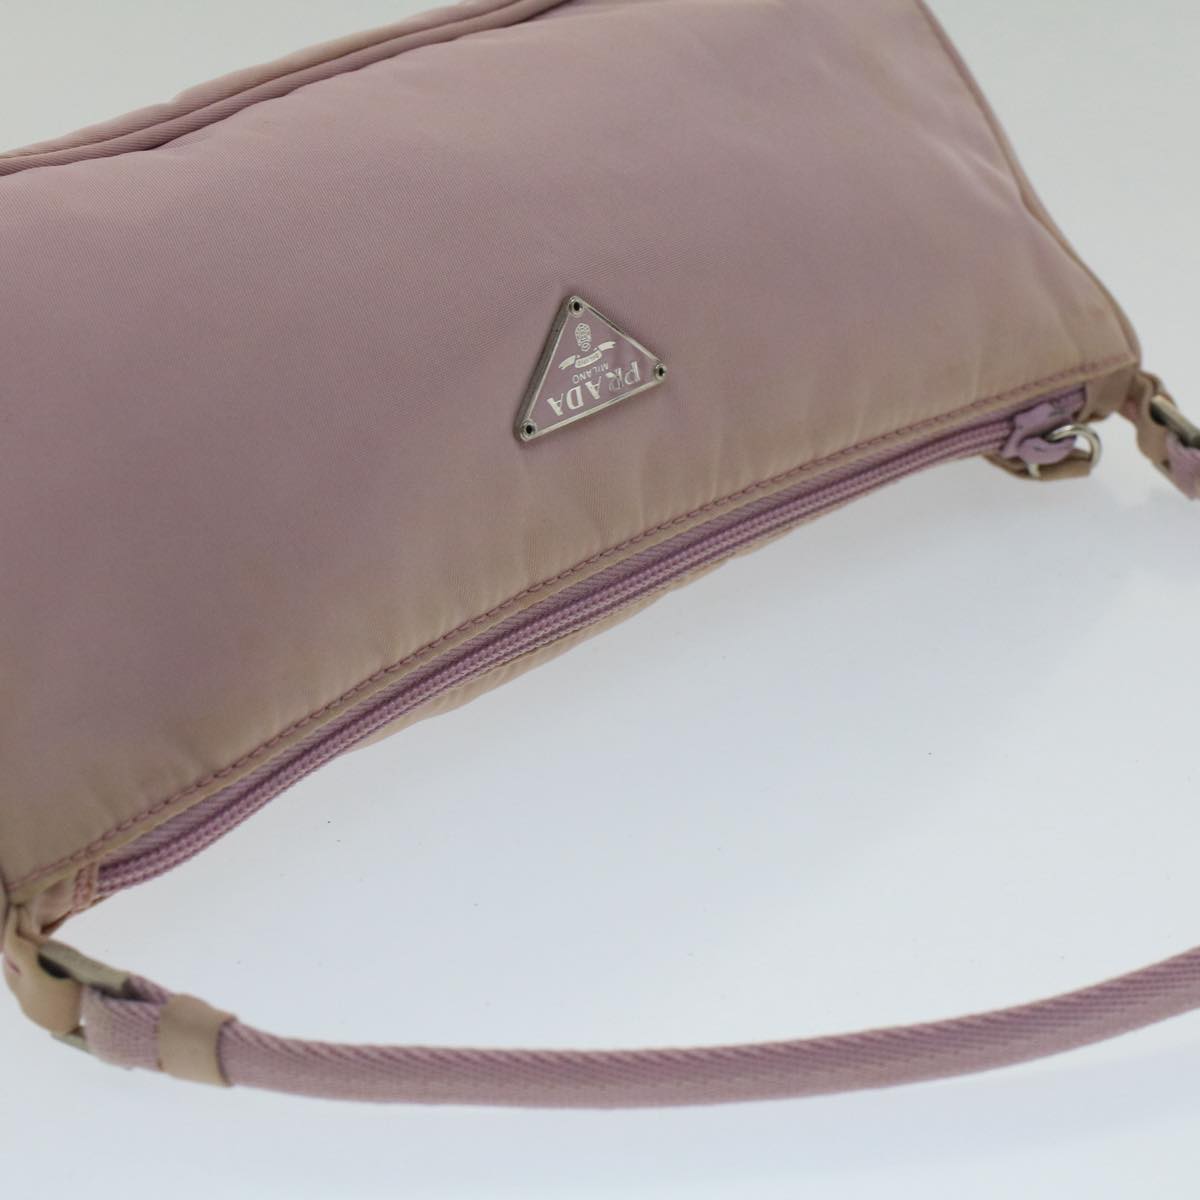 PRADA Accessory Pouch Nylon Pink Auth bs7481